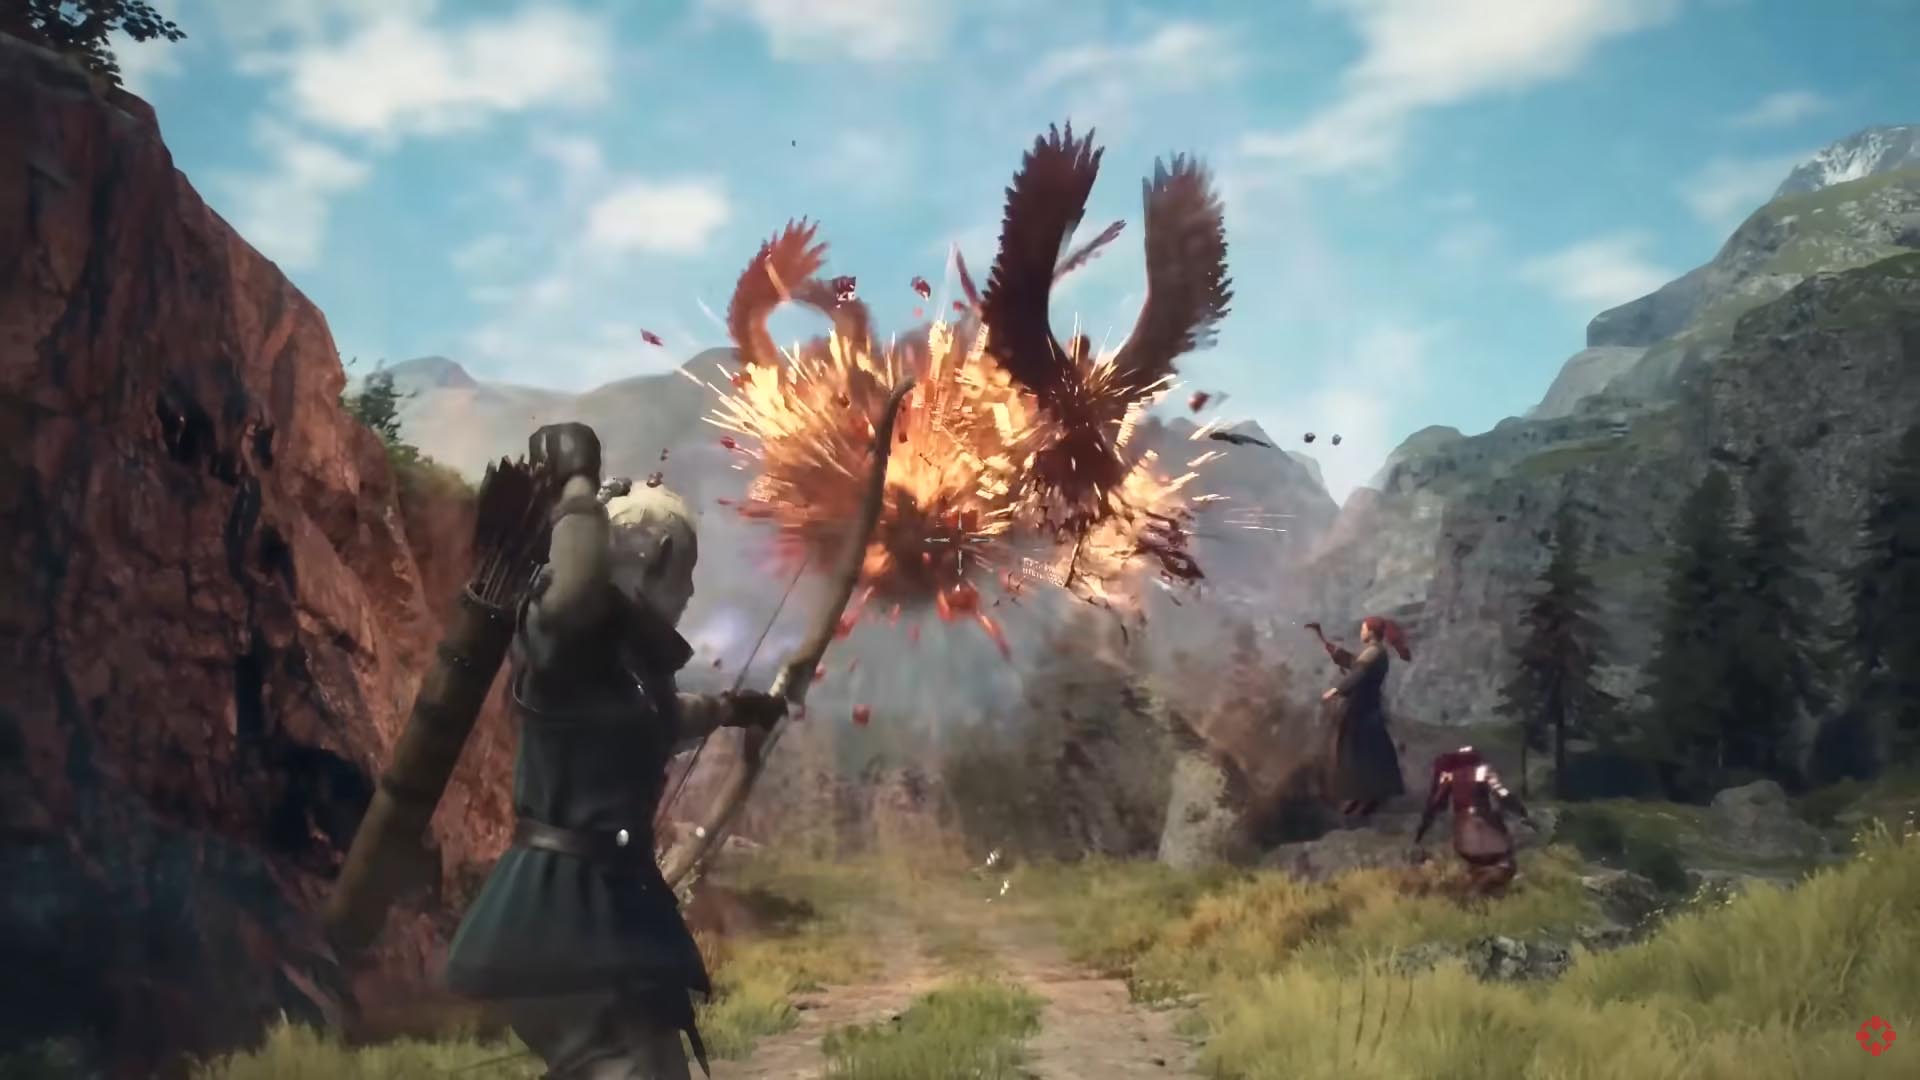 Dragon's Dogma 2 Archer preview from IGN trailer